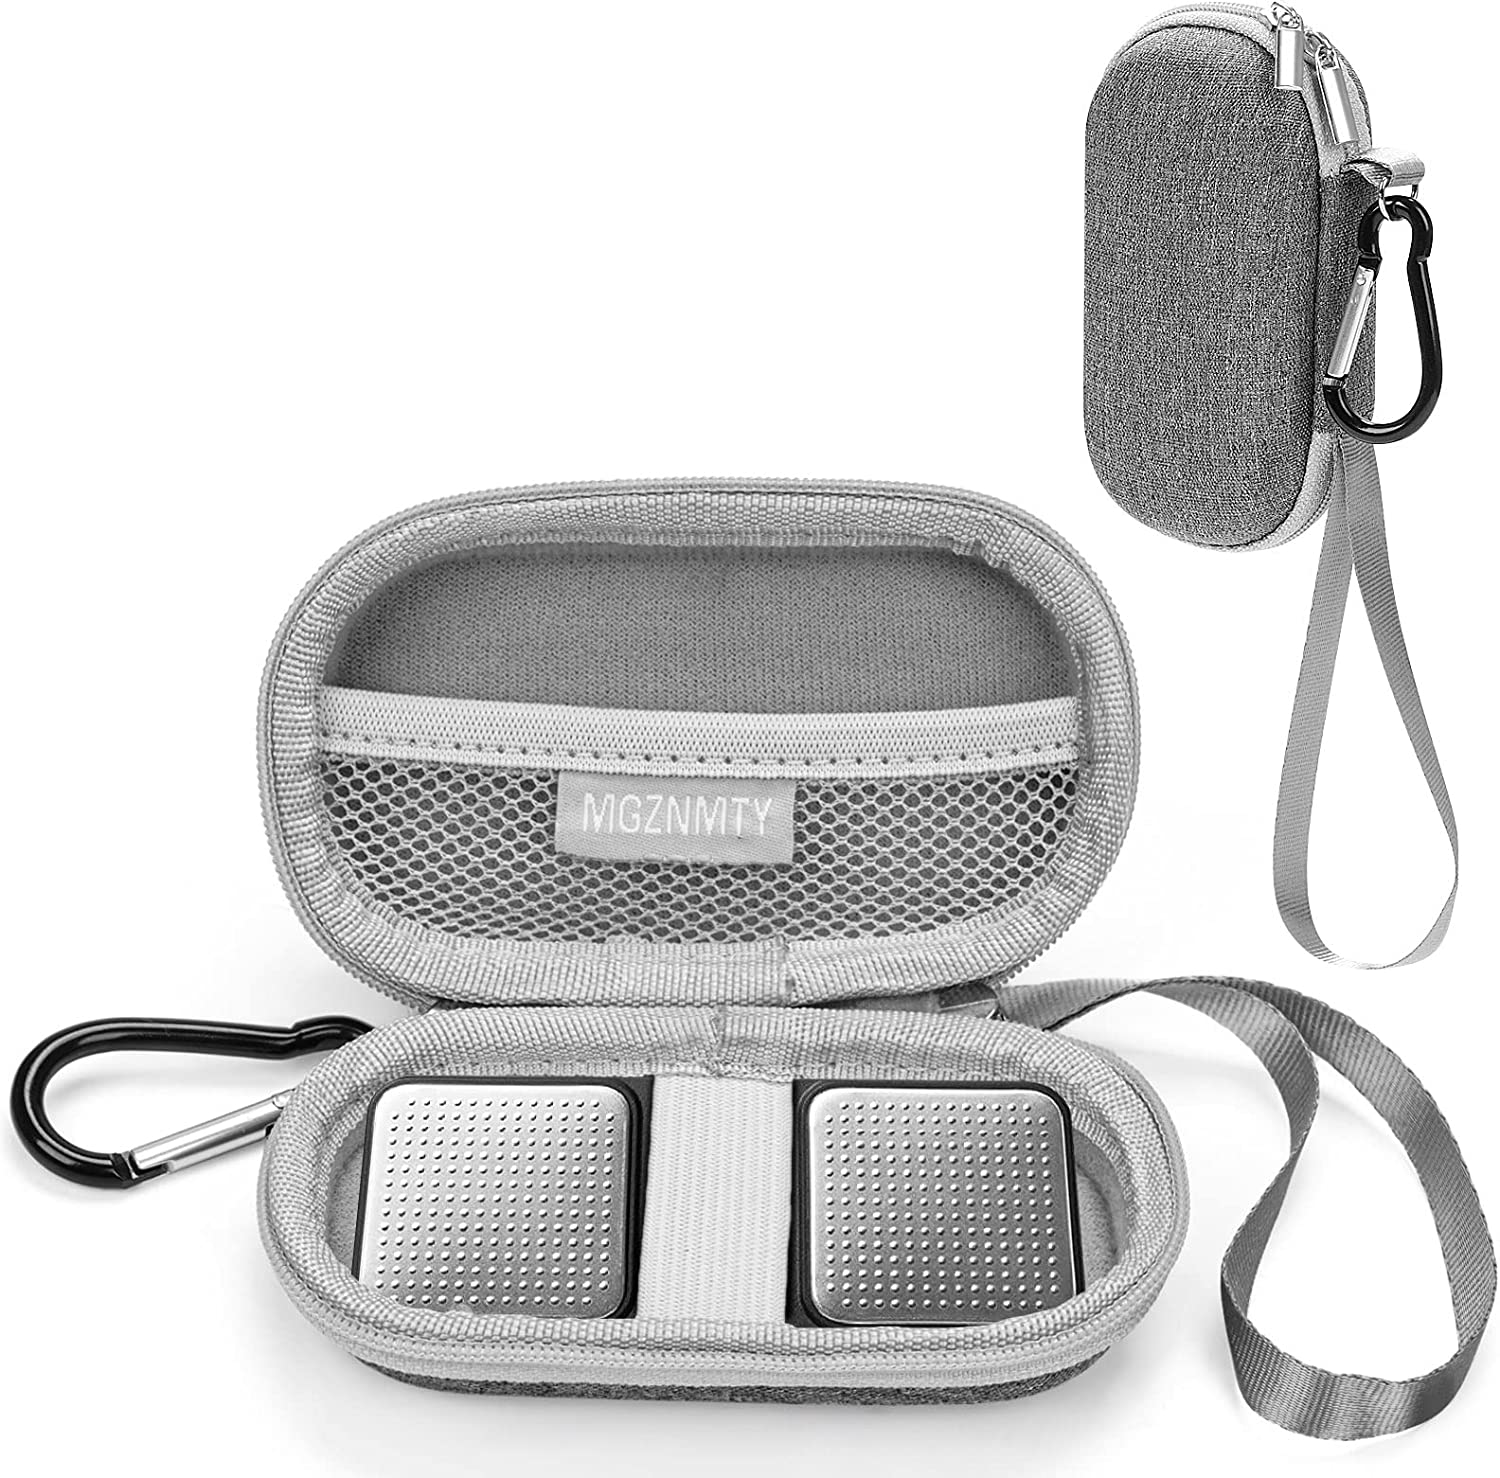 MGZNMTY Portable Hard Travel Case for AliveCor Kardia Mobile Heart Monitor Personal EKG / KardiaMobile 6-Lead Rate Monitoring Devices (Case Only)